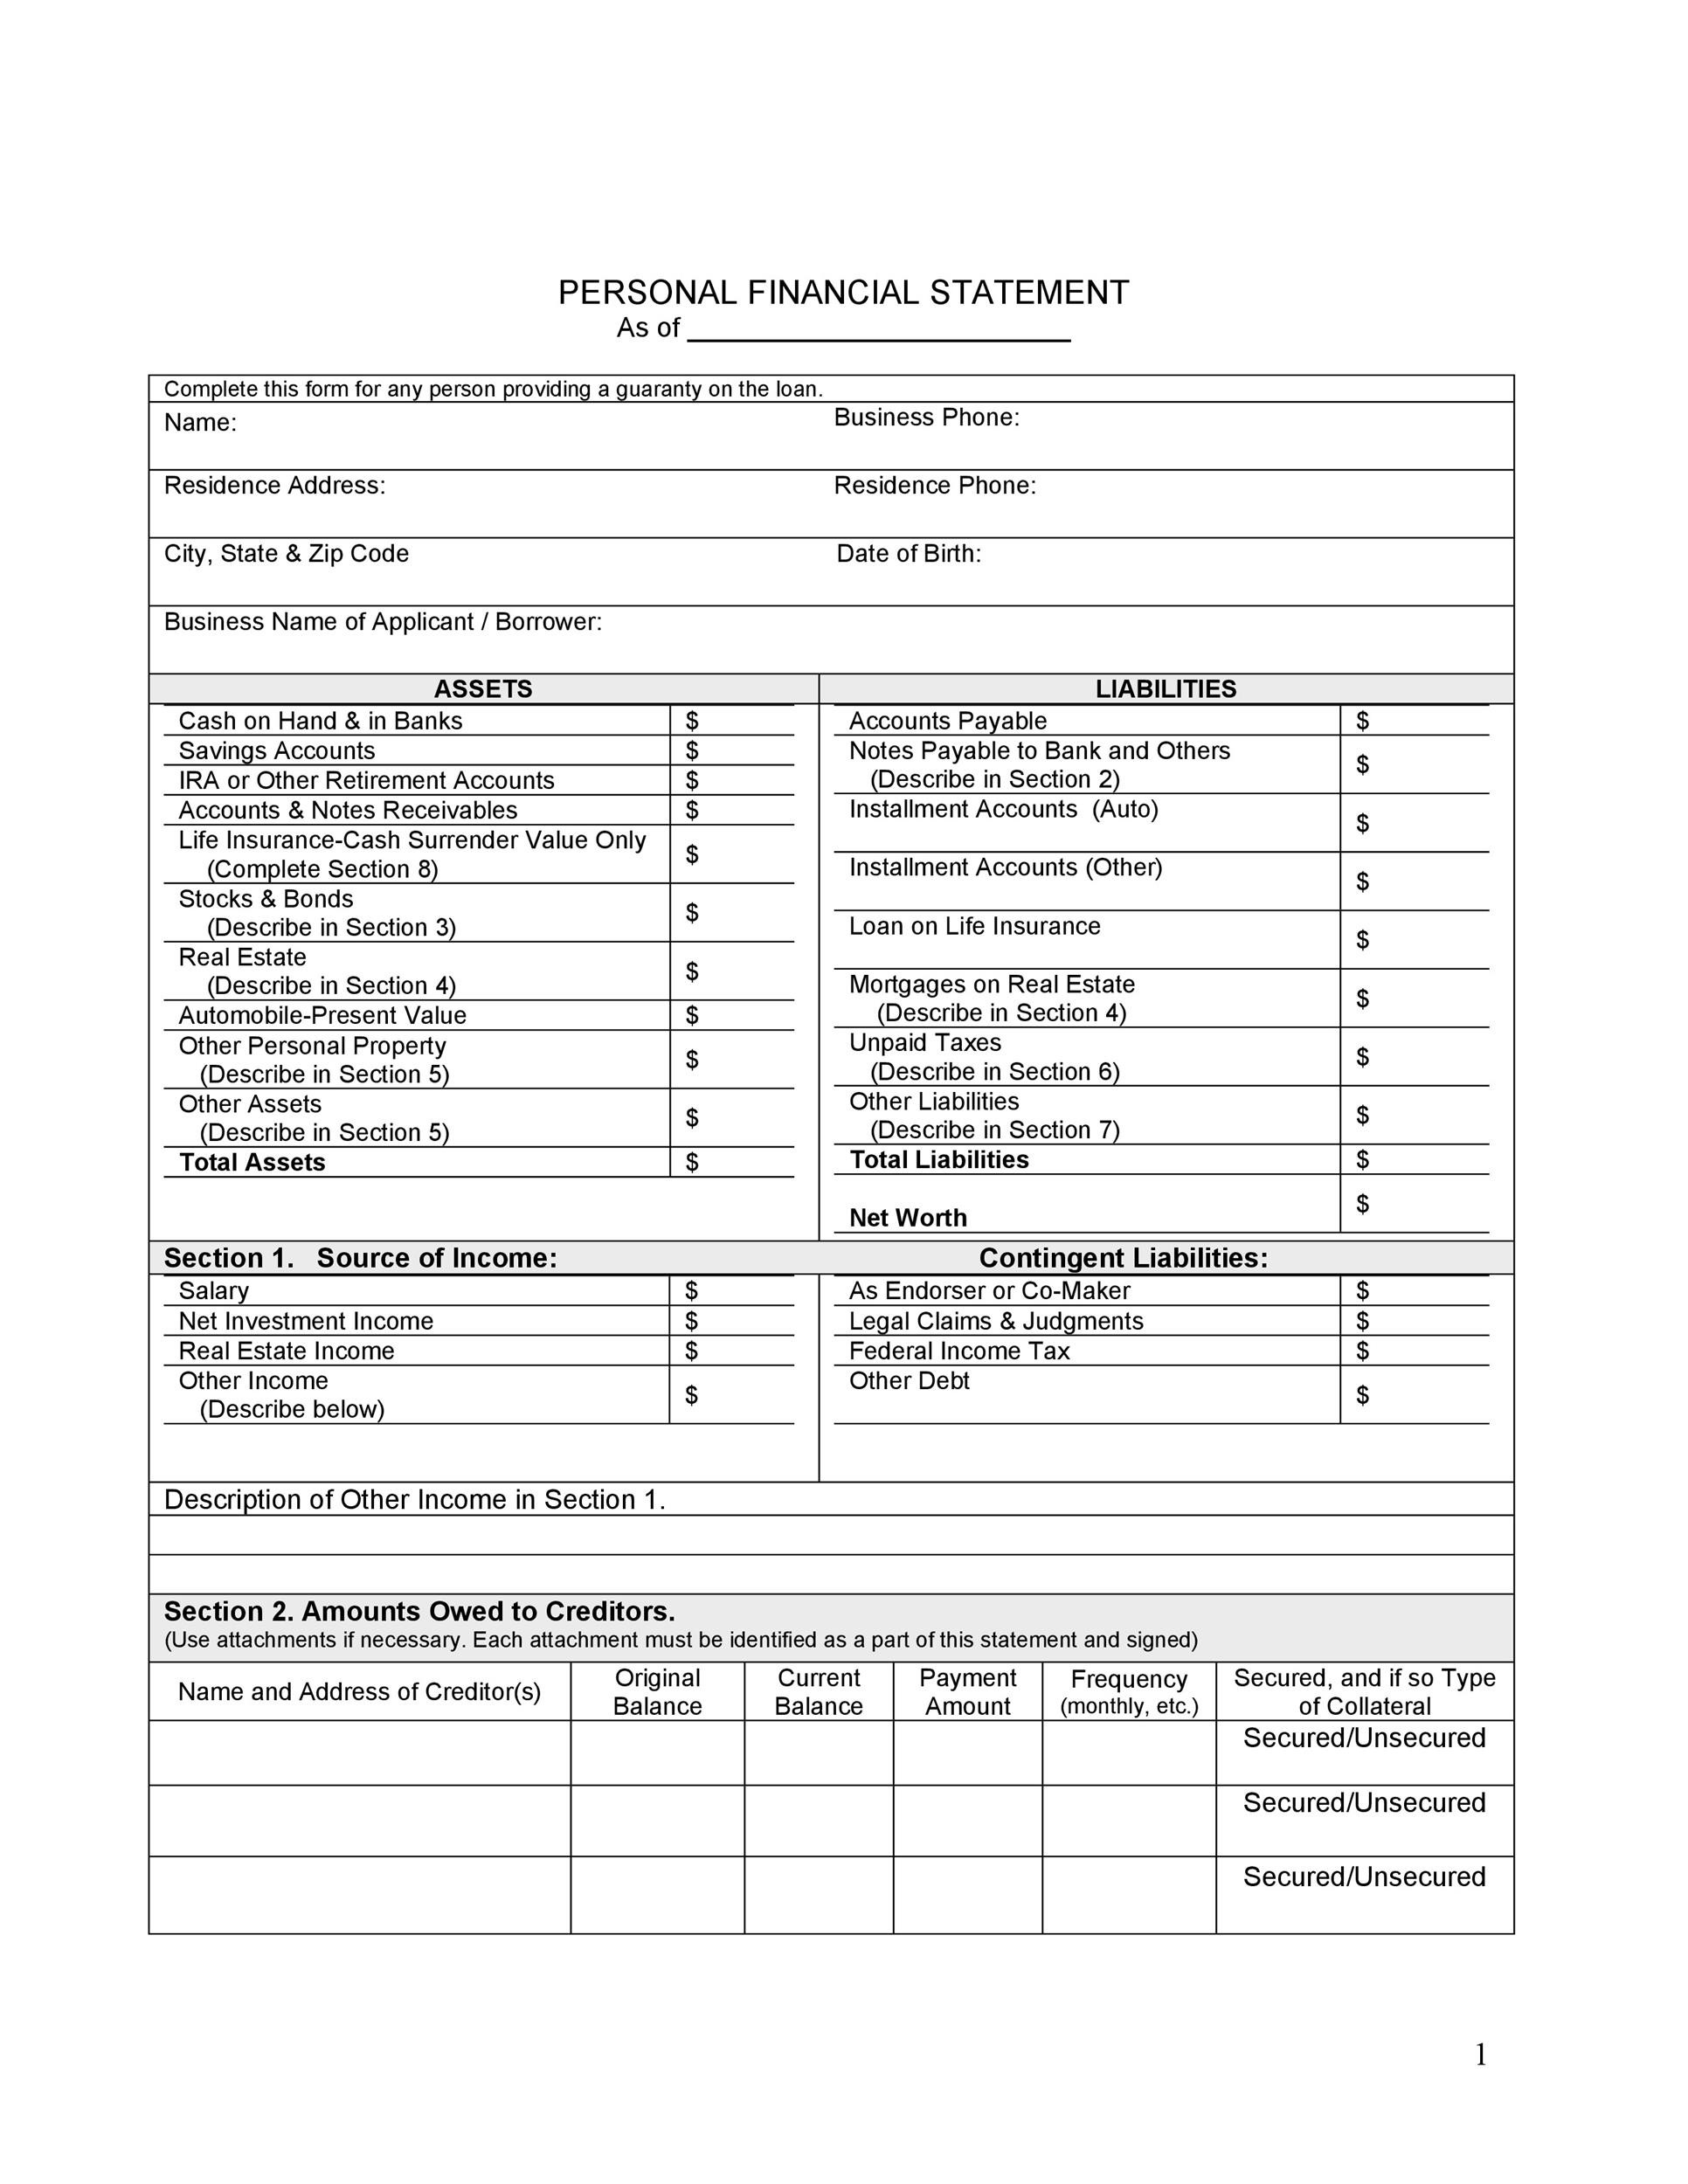 40+ Personal Financial Statement Templates & Forms Template Lab